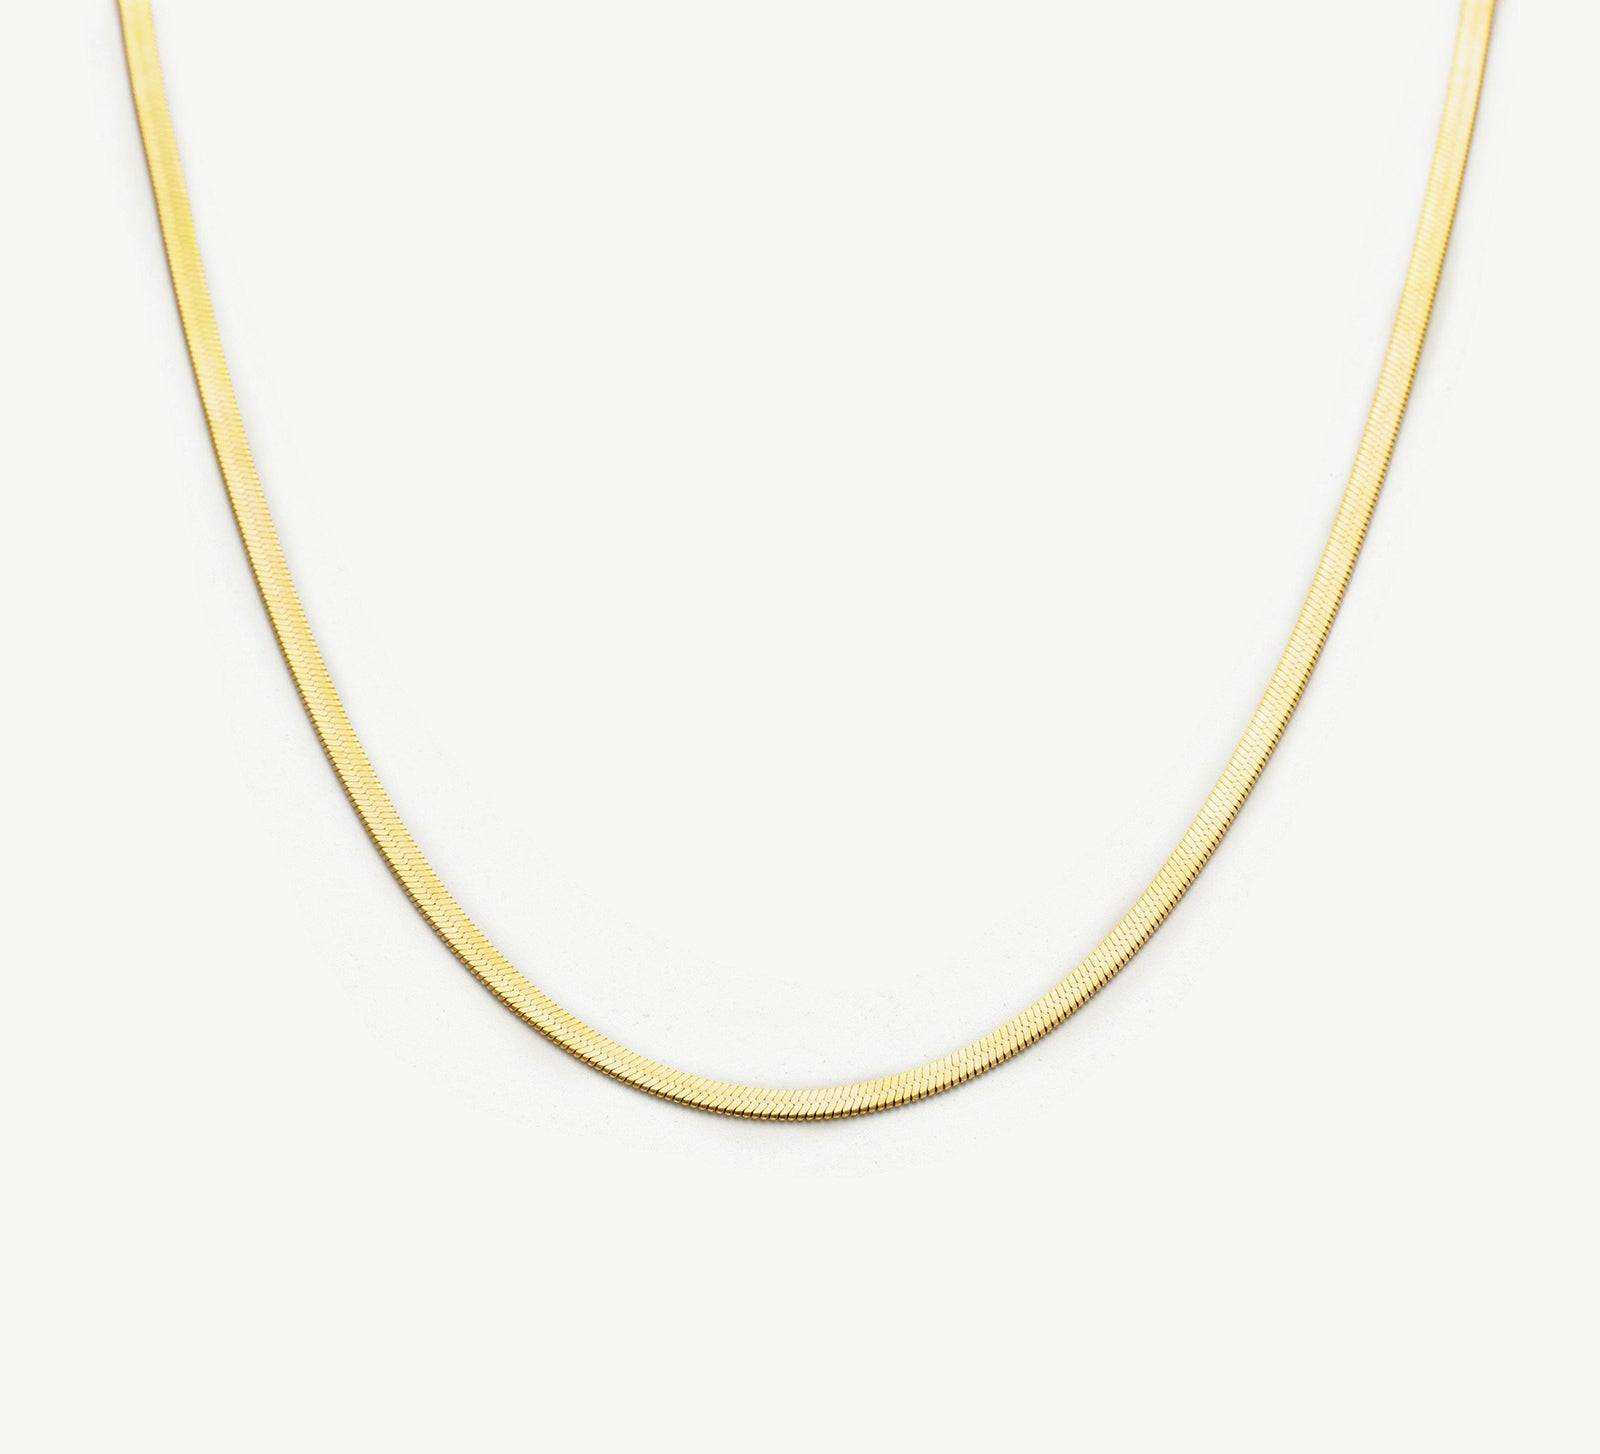 Snake Chain Necklace, a sleek and modern piece featuring a serpent-like chain that effortlessly wraps around your neckline, adding a touch of contemporary elegance to your look